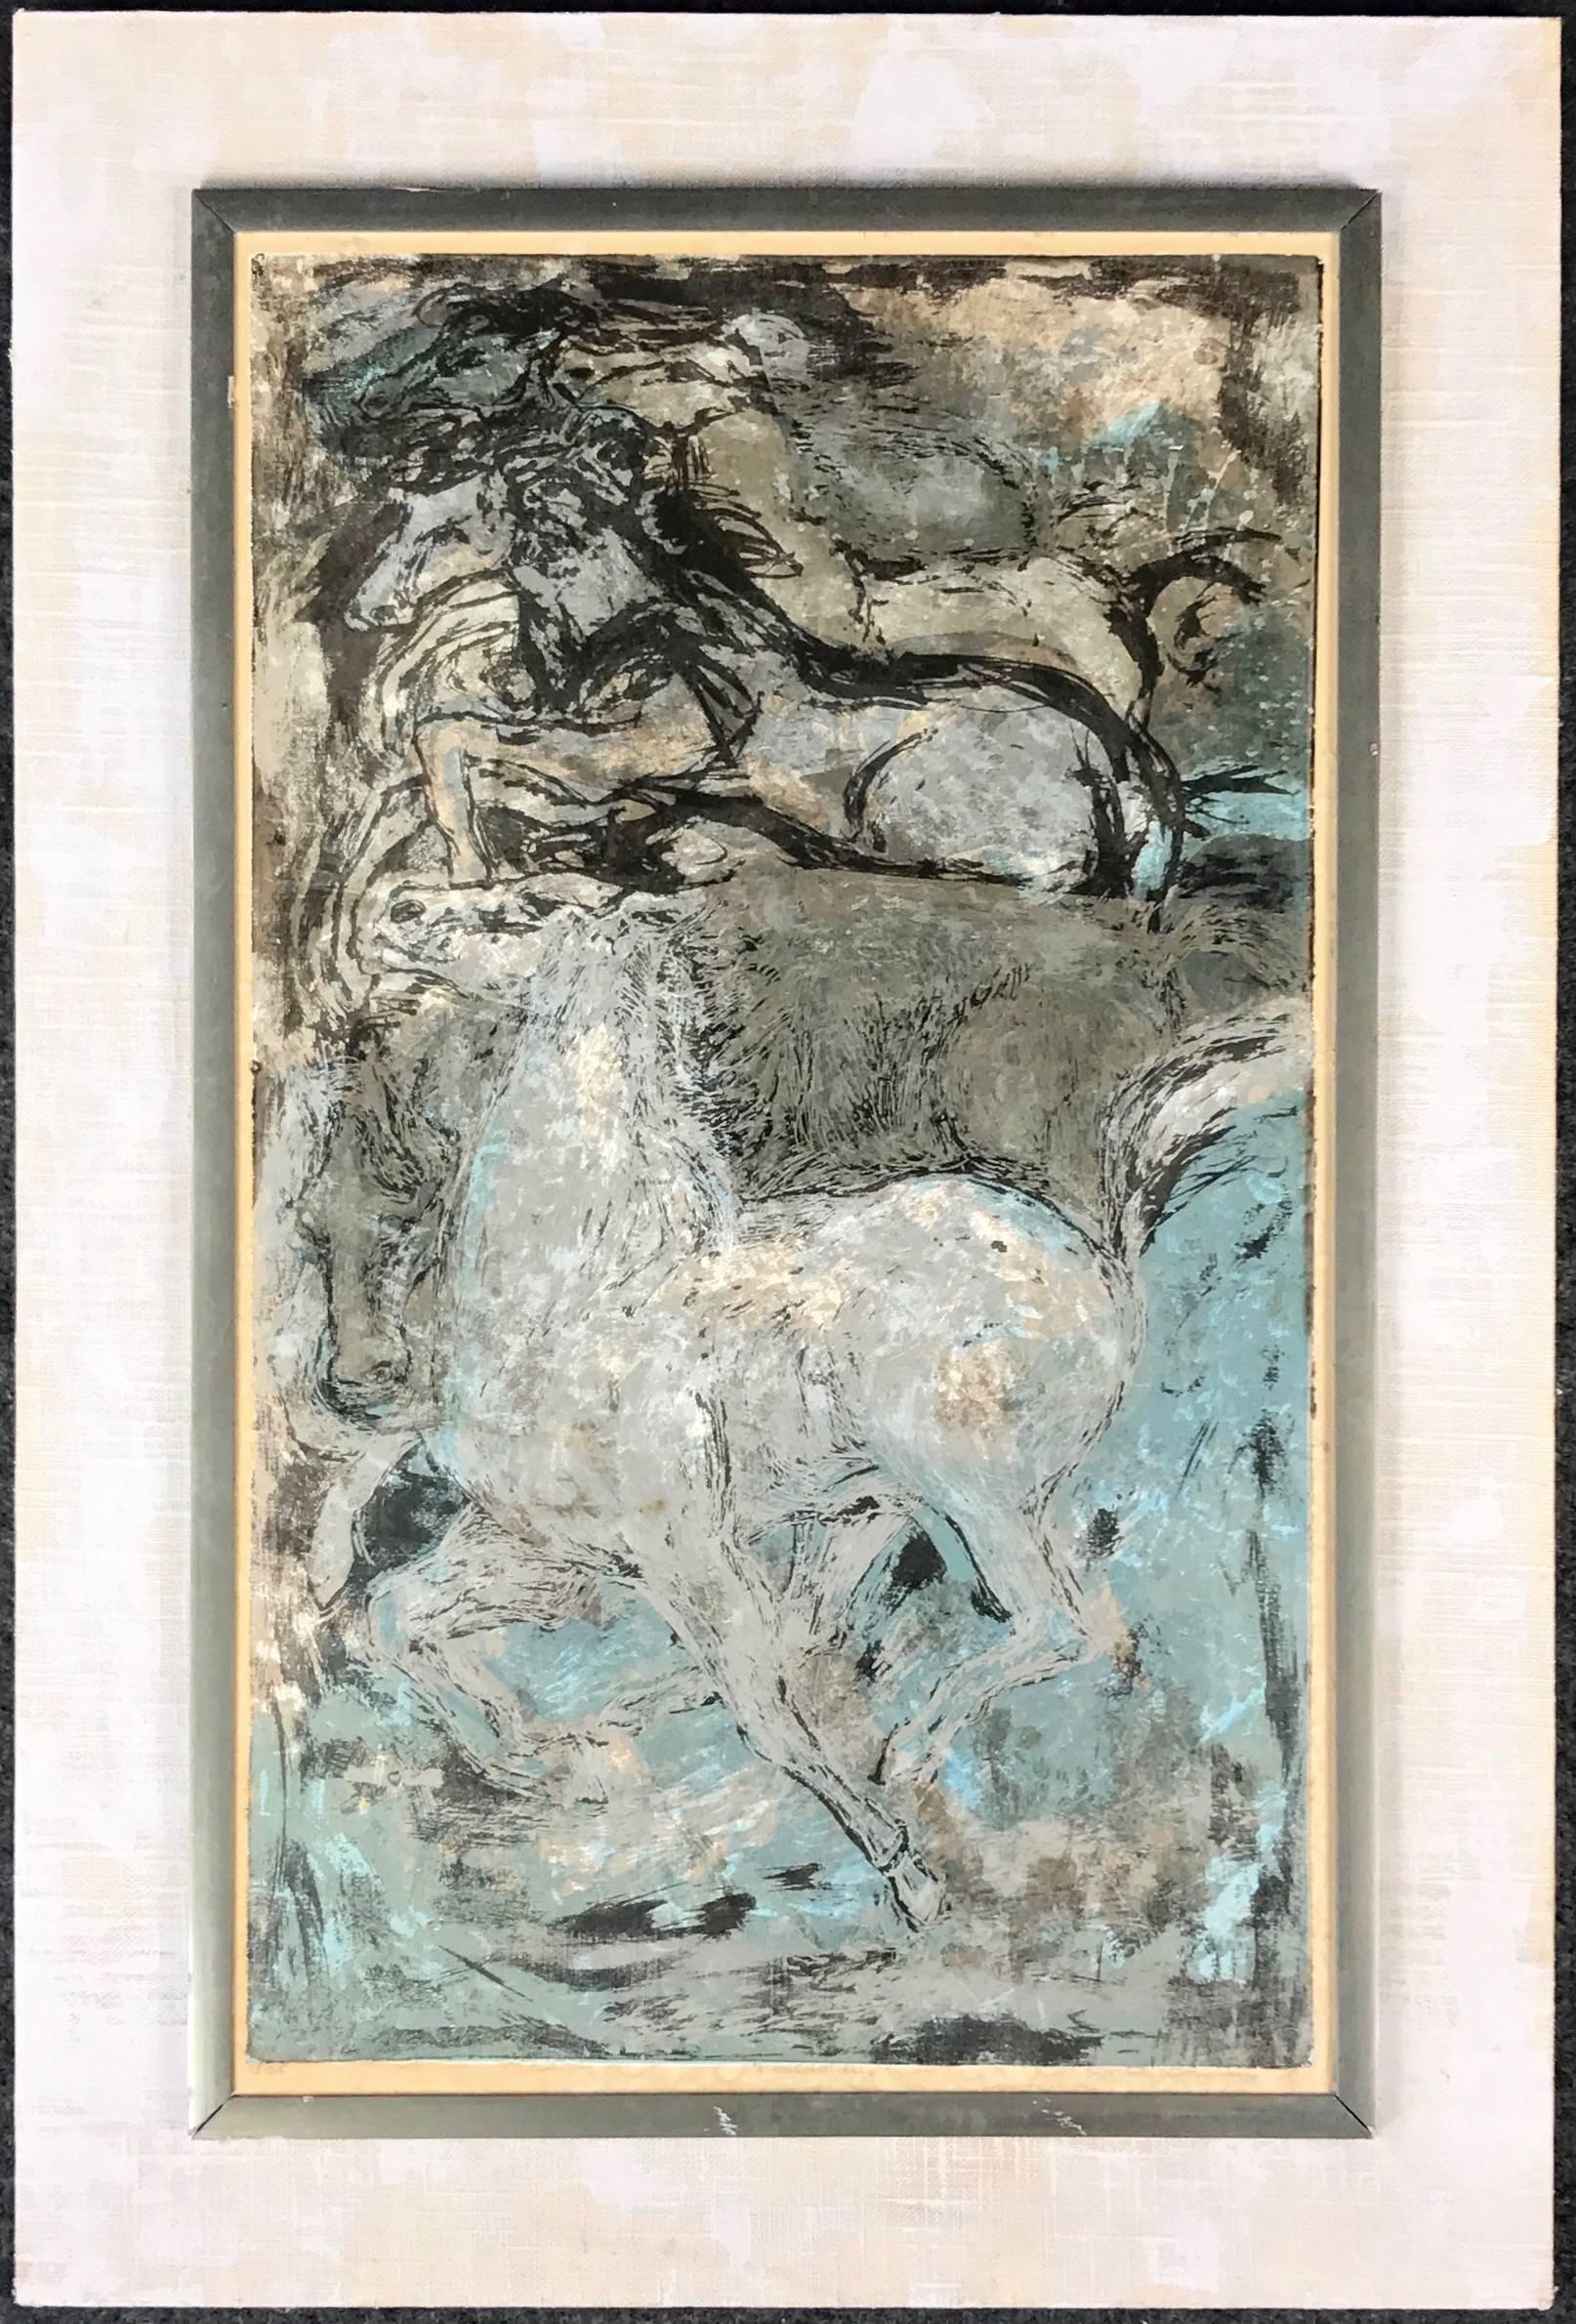 A wonderfully kinetic abstract expressionist composition depicting a herd of majestic mustangs running free under the moonlight. It’s comprised of a multitude of complex, expertly layered, single-color screen print passes, with a detailed looseness